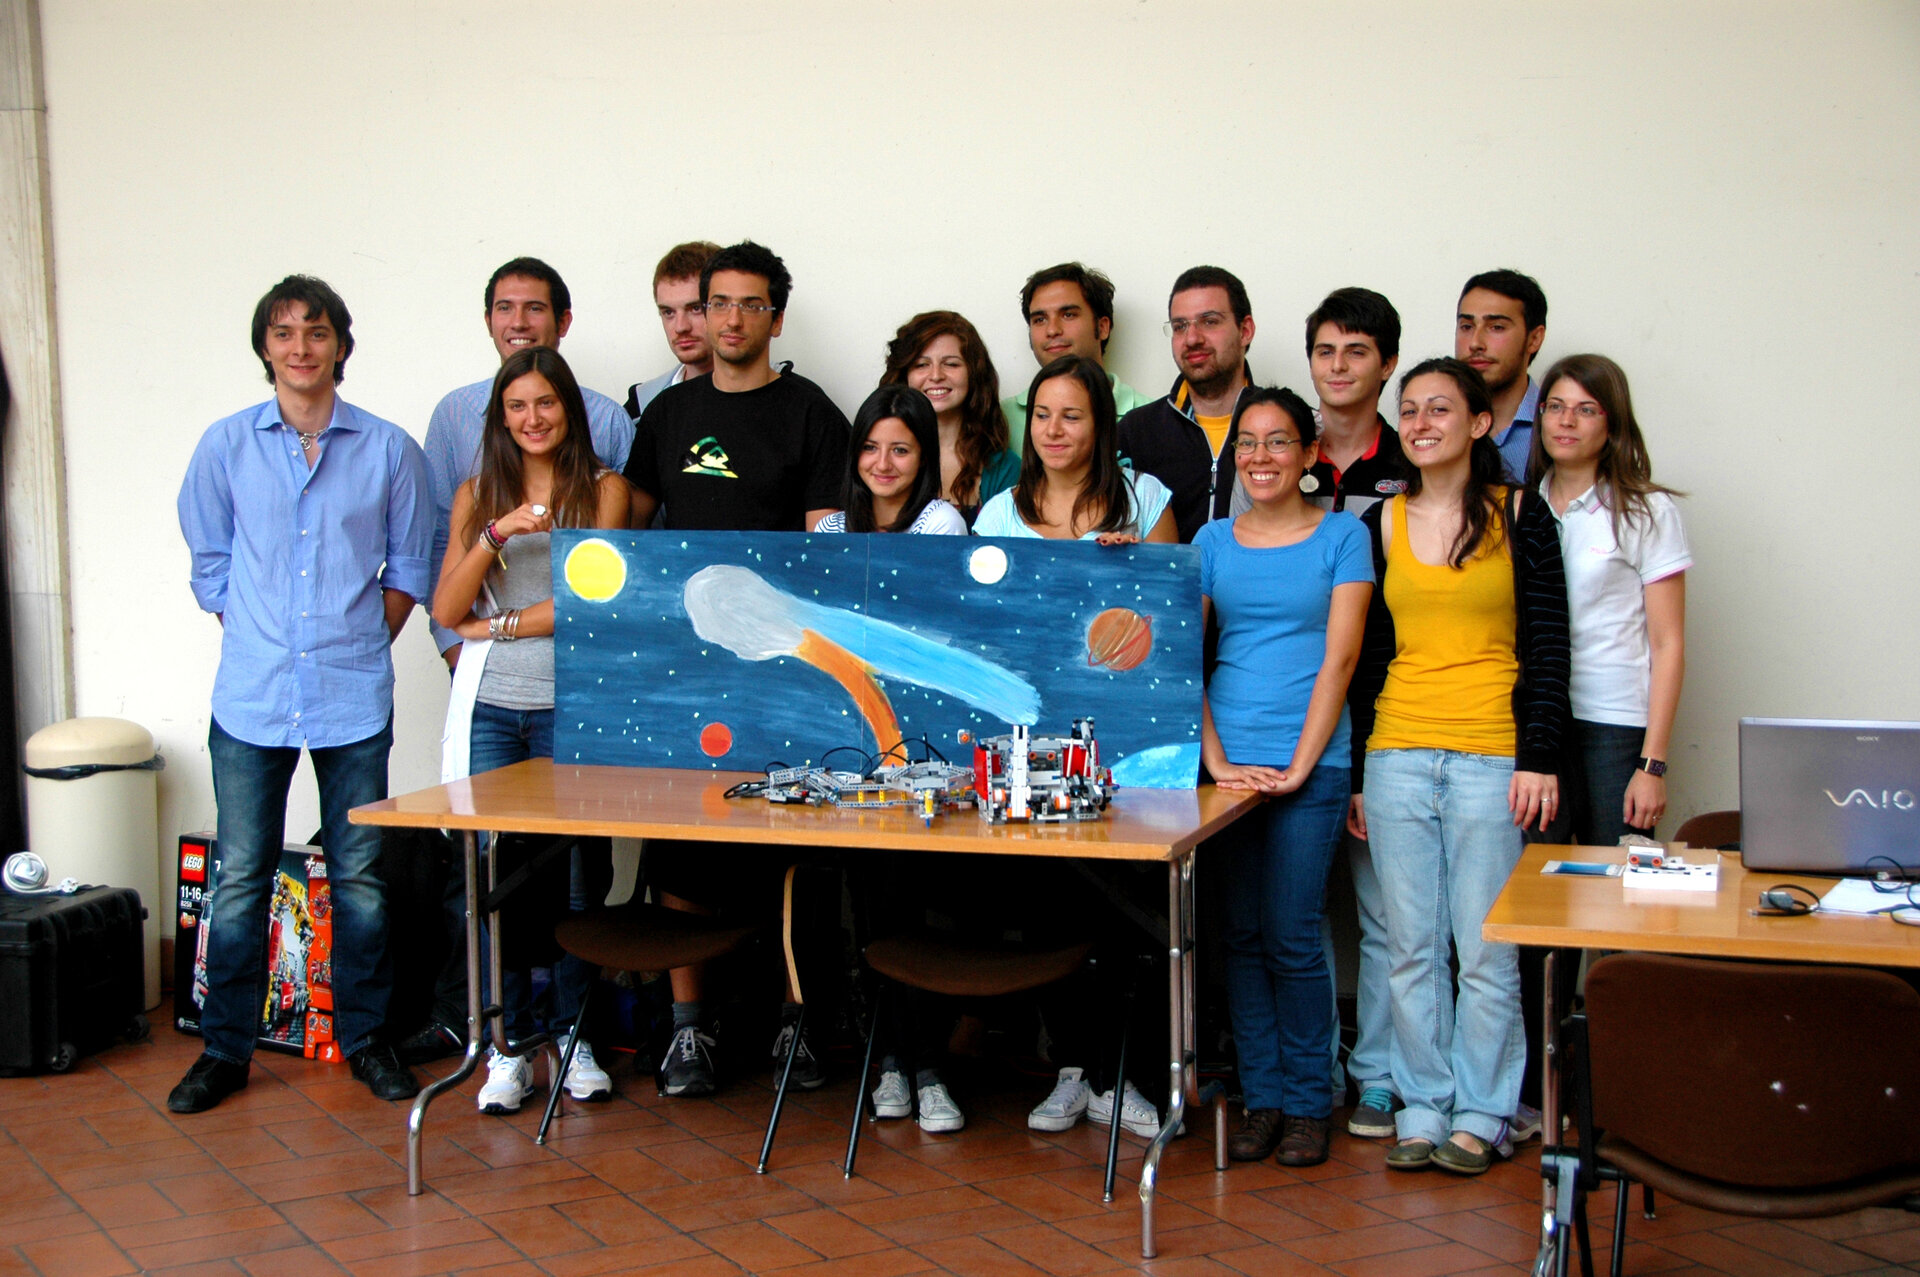 The students who tested the Rosetta model